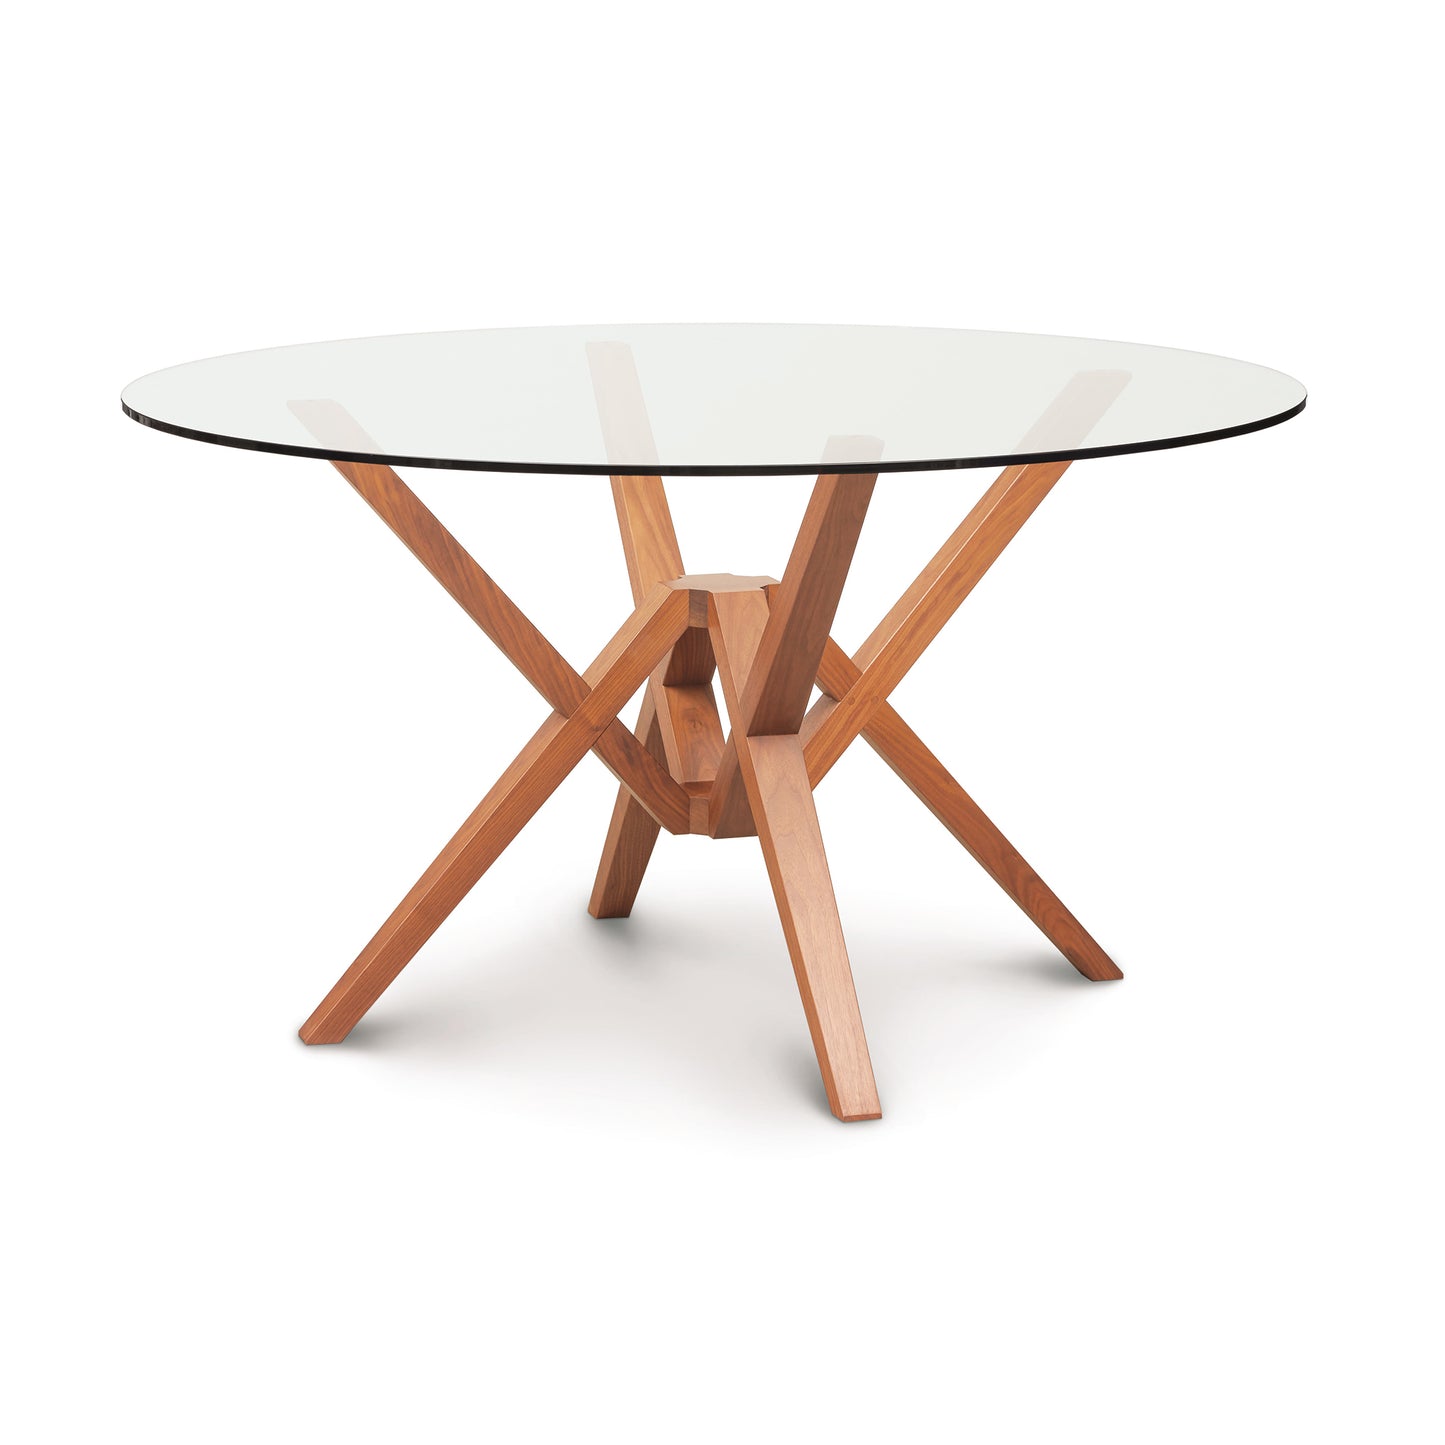 The Copeland Furniture Exeter Round Glass Top Table boasts innovative engineering, featuring a round glass dining top supported by sturdy wooden legs.